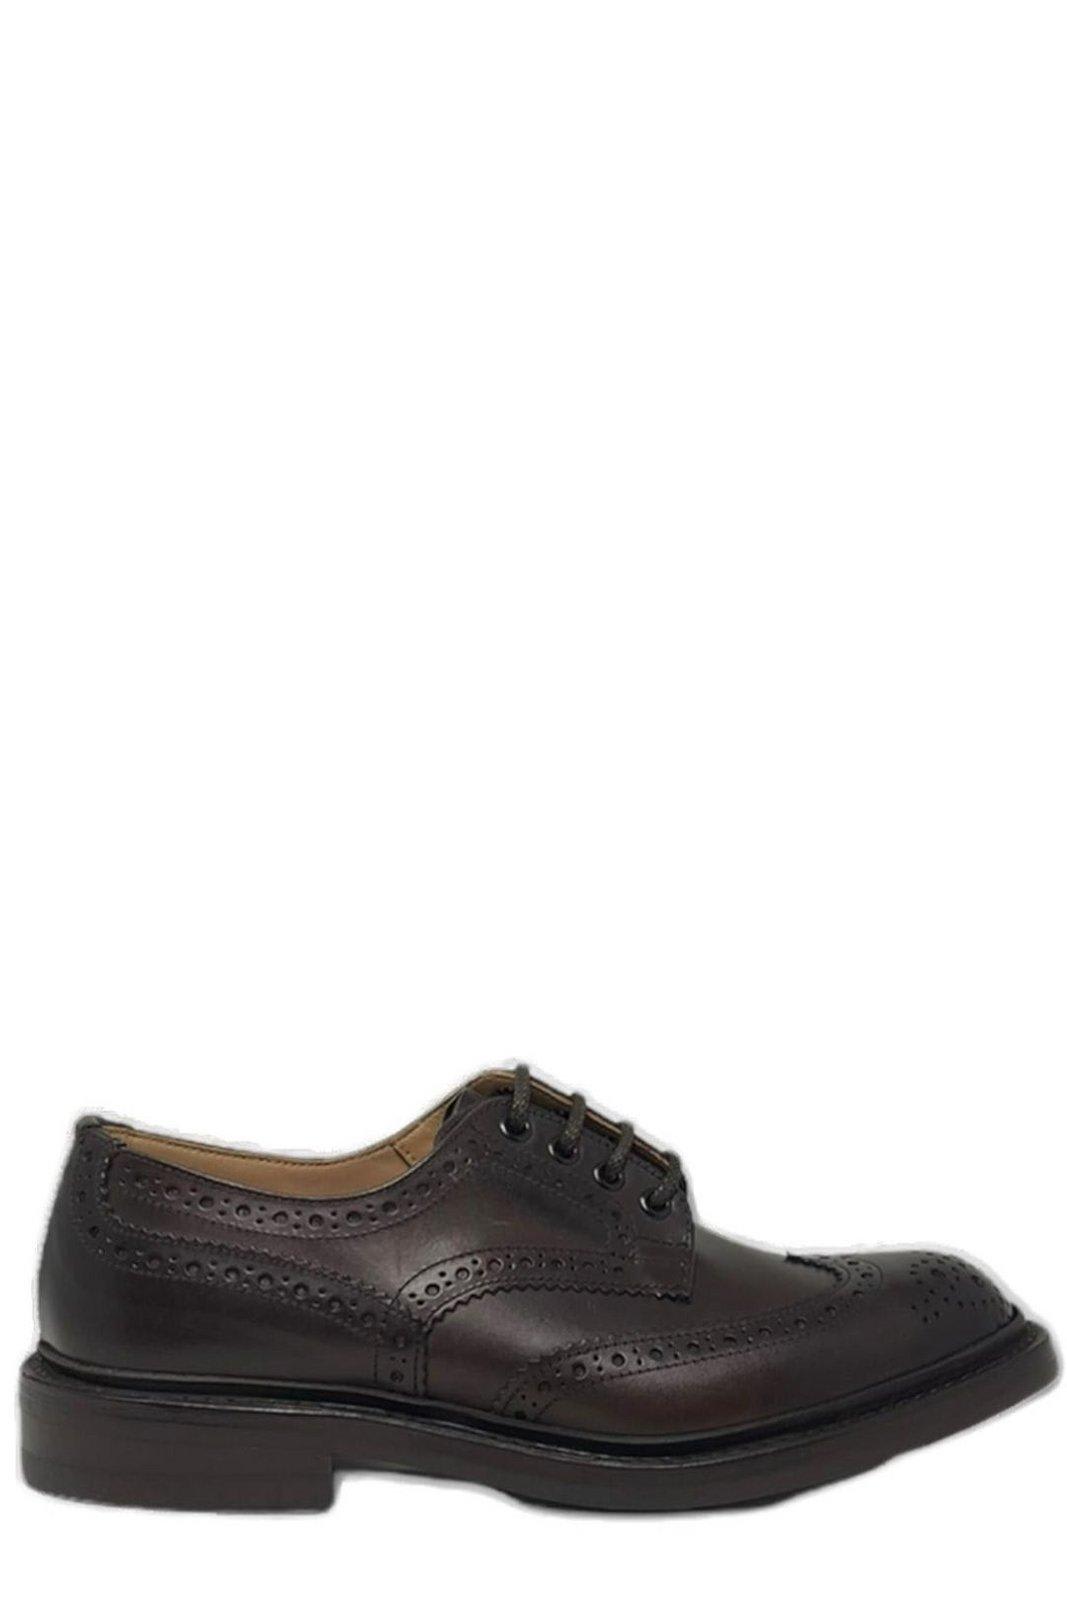 Tricker's Bourton Brogue Lace-up Shoes Trickers